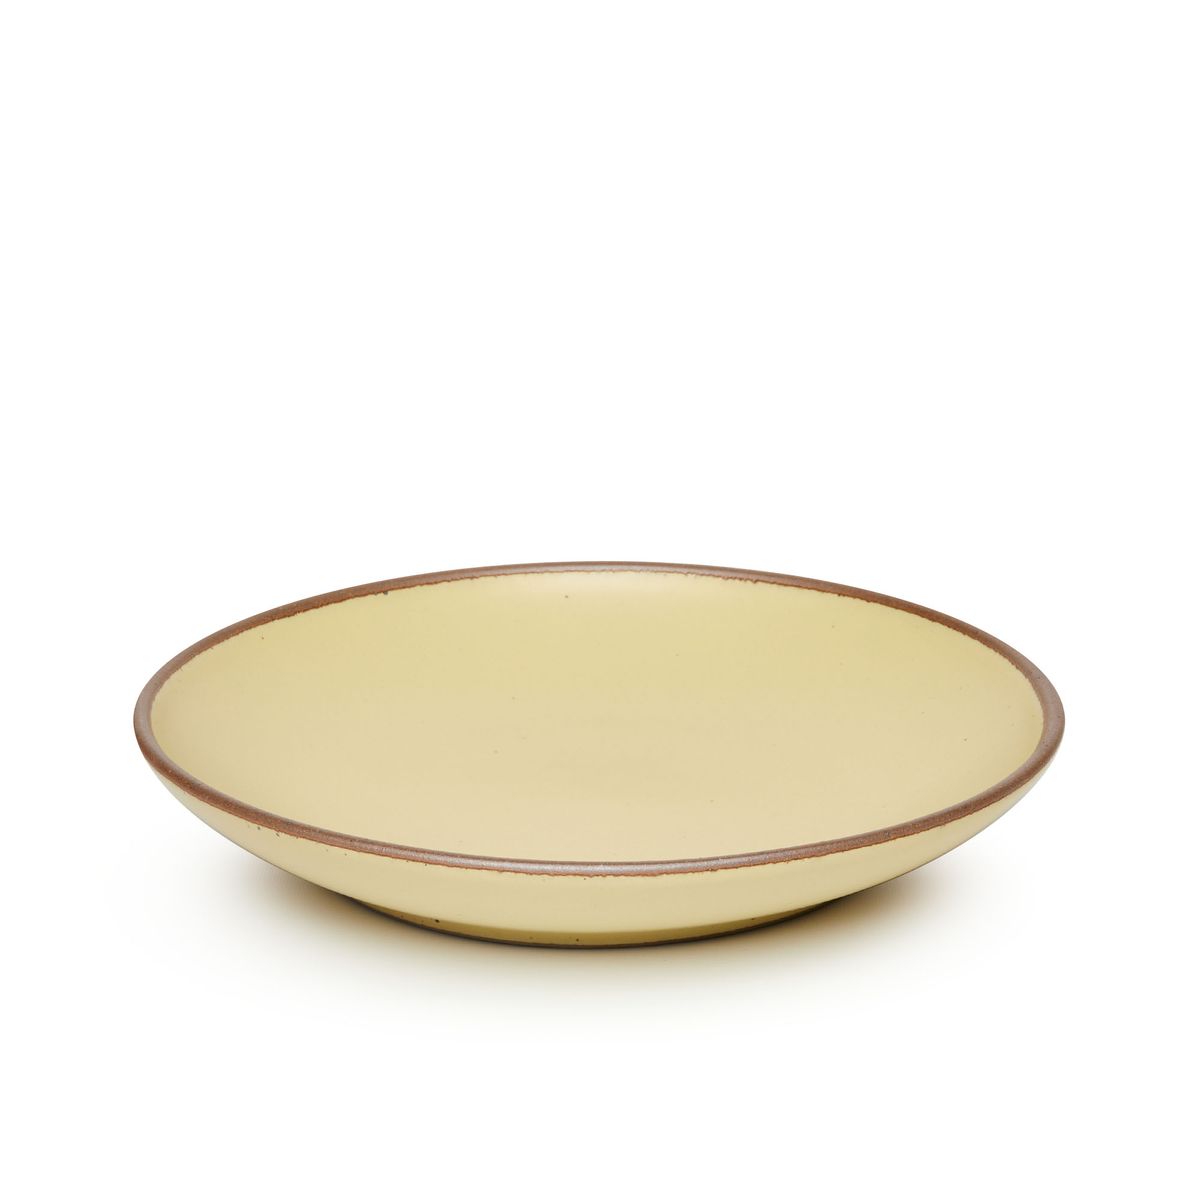 A large ceramic plate with a curved bowl edge in a light butter yellow color featuring iron speckles and an unglazed rim